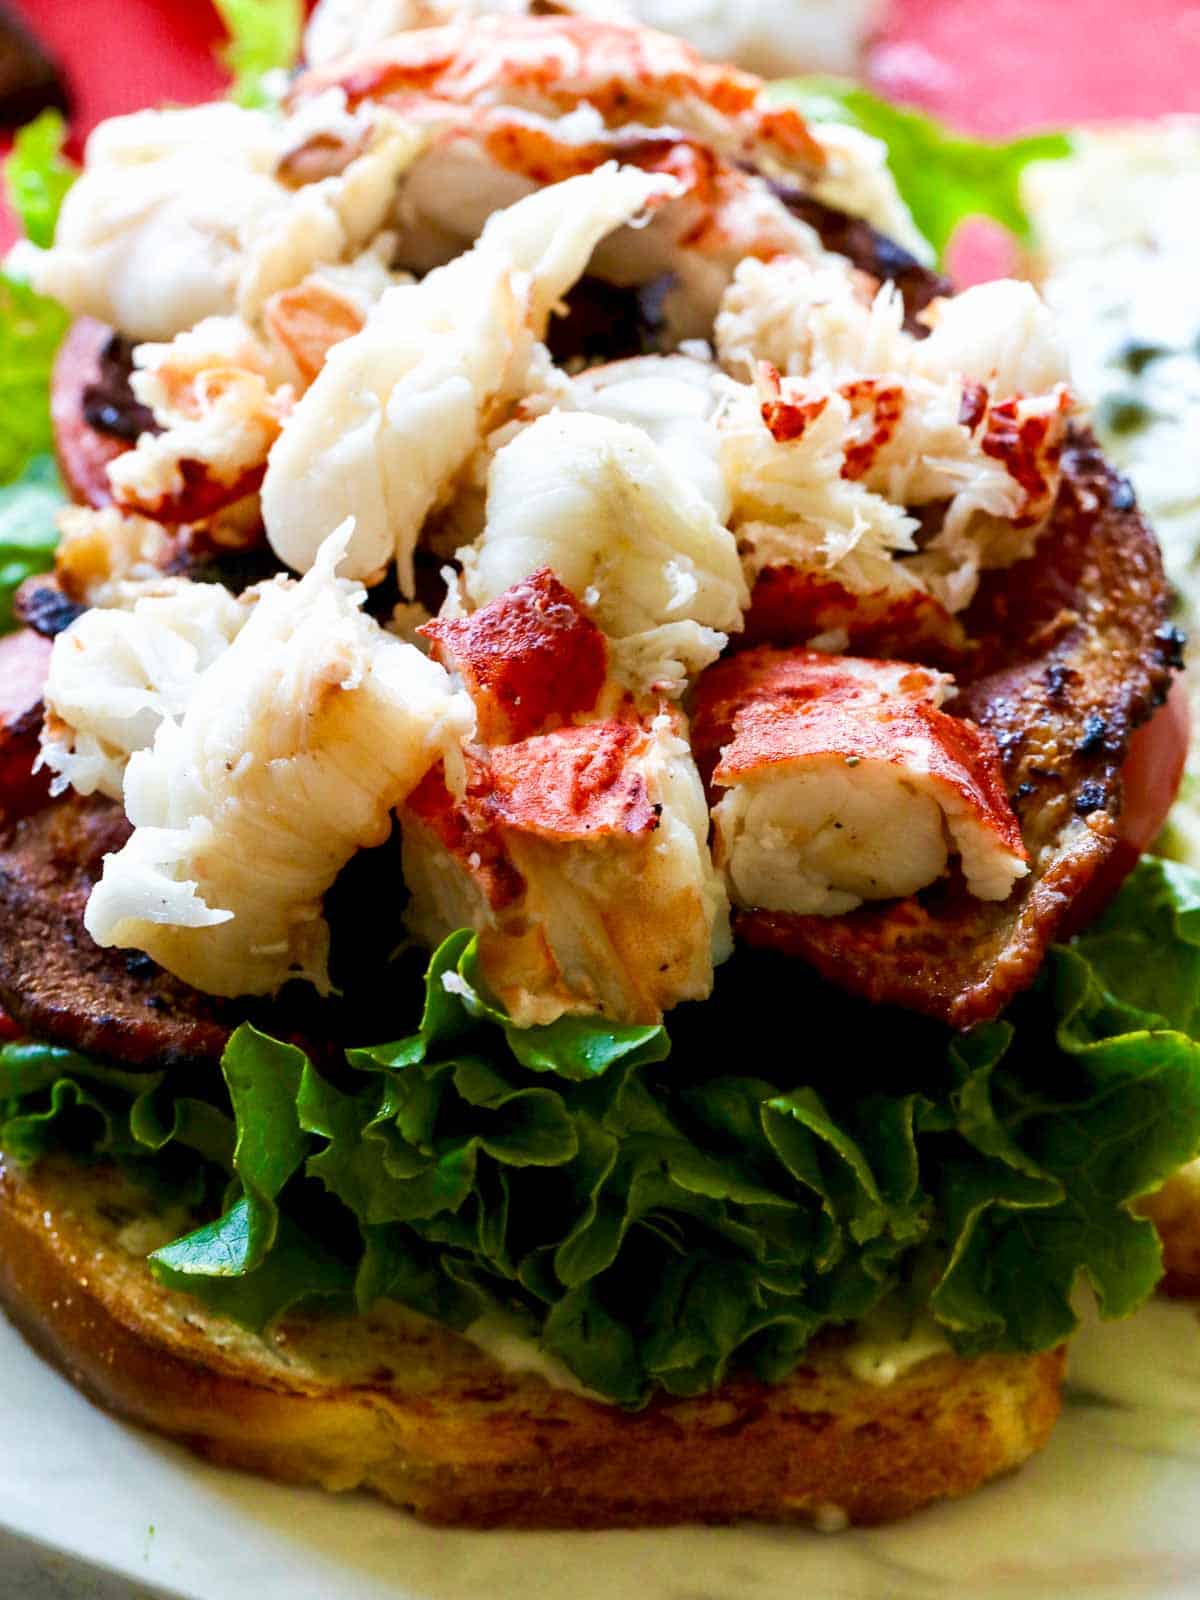 Assembly of a lobster BLT sandwich with bread, lettuce, tomato, bacon, and lobster meat.